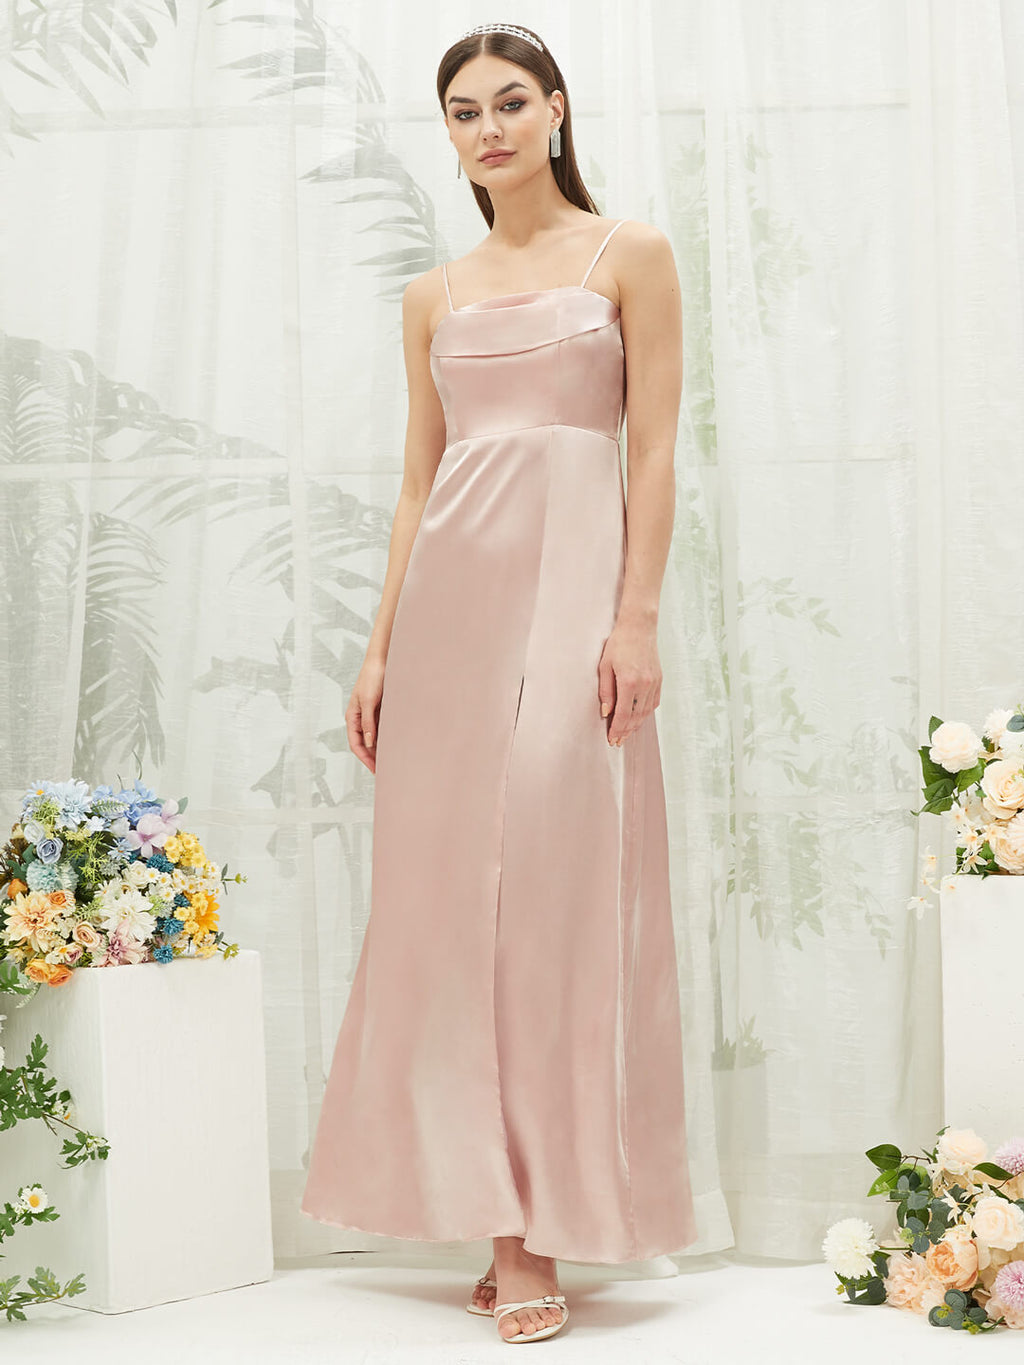 Dusty Pink Satin Convertible Slit Off-Shoulder Pleated Cowl Neck Strapless Adjustable Straps Bridesmaid Dress Mina for Women from NZBridal